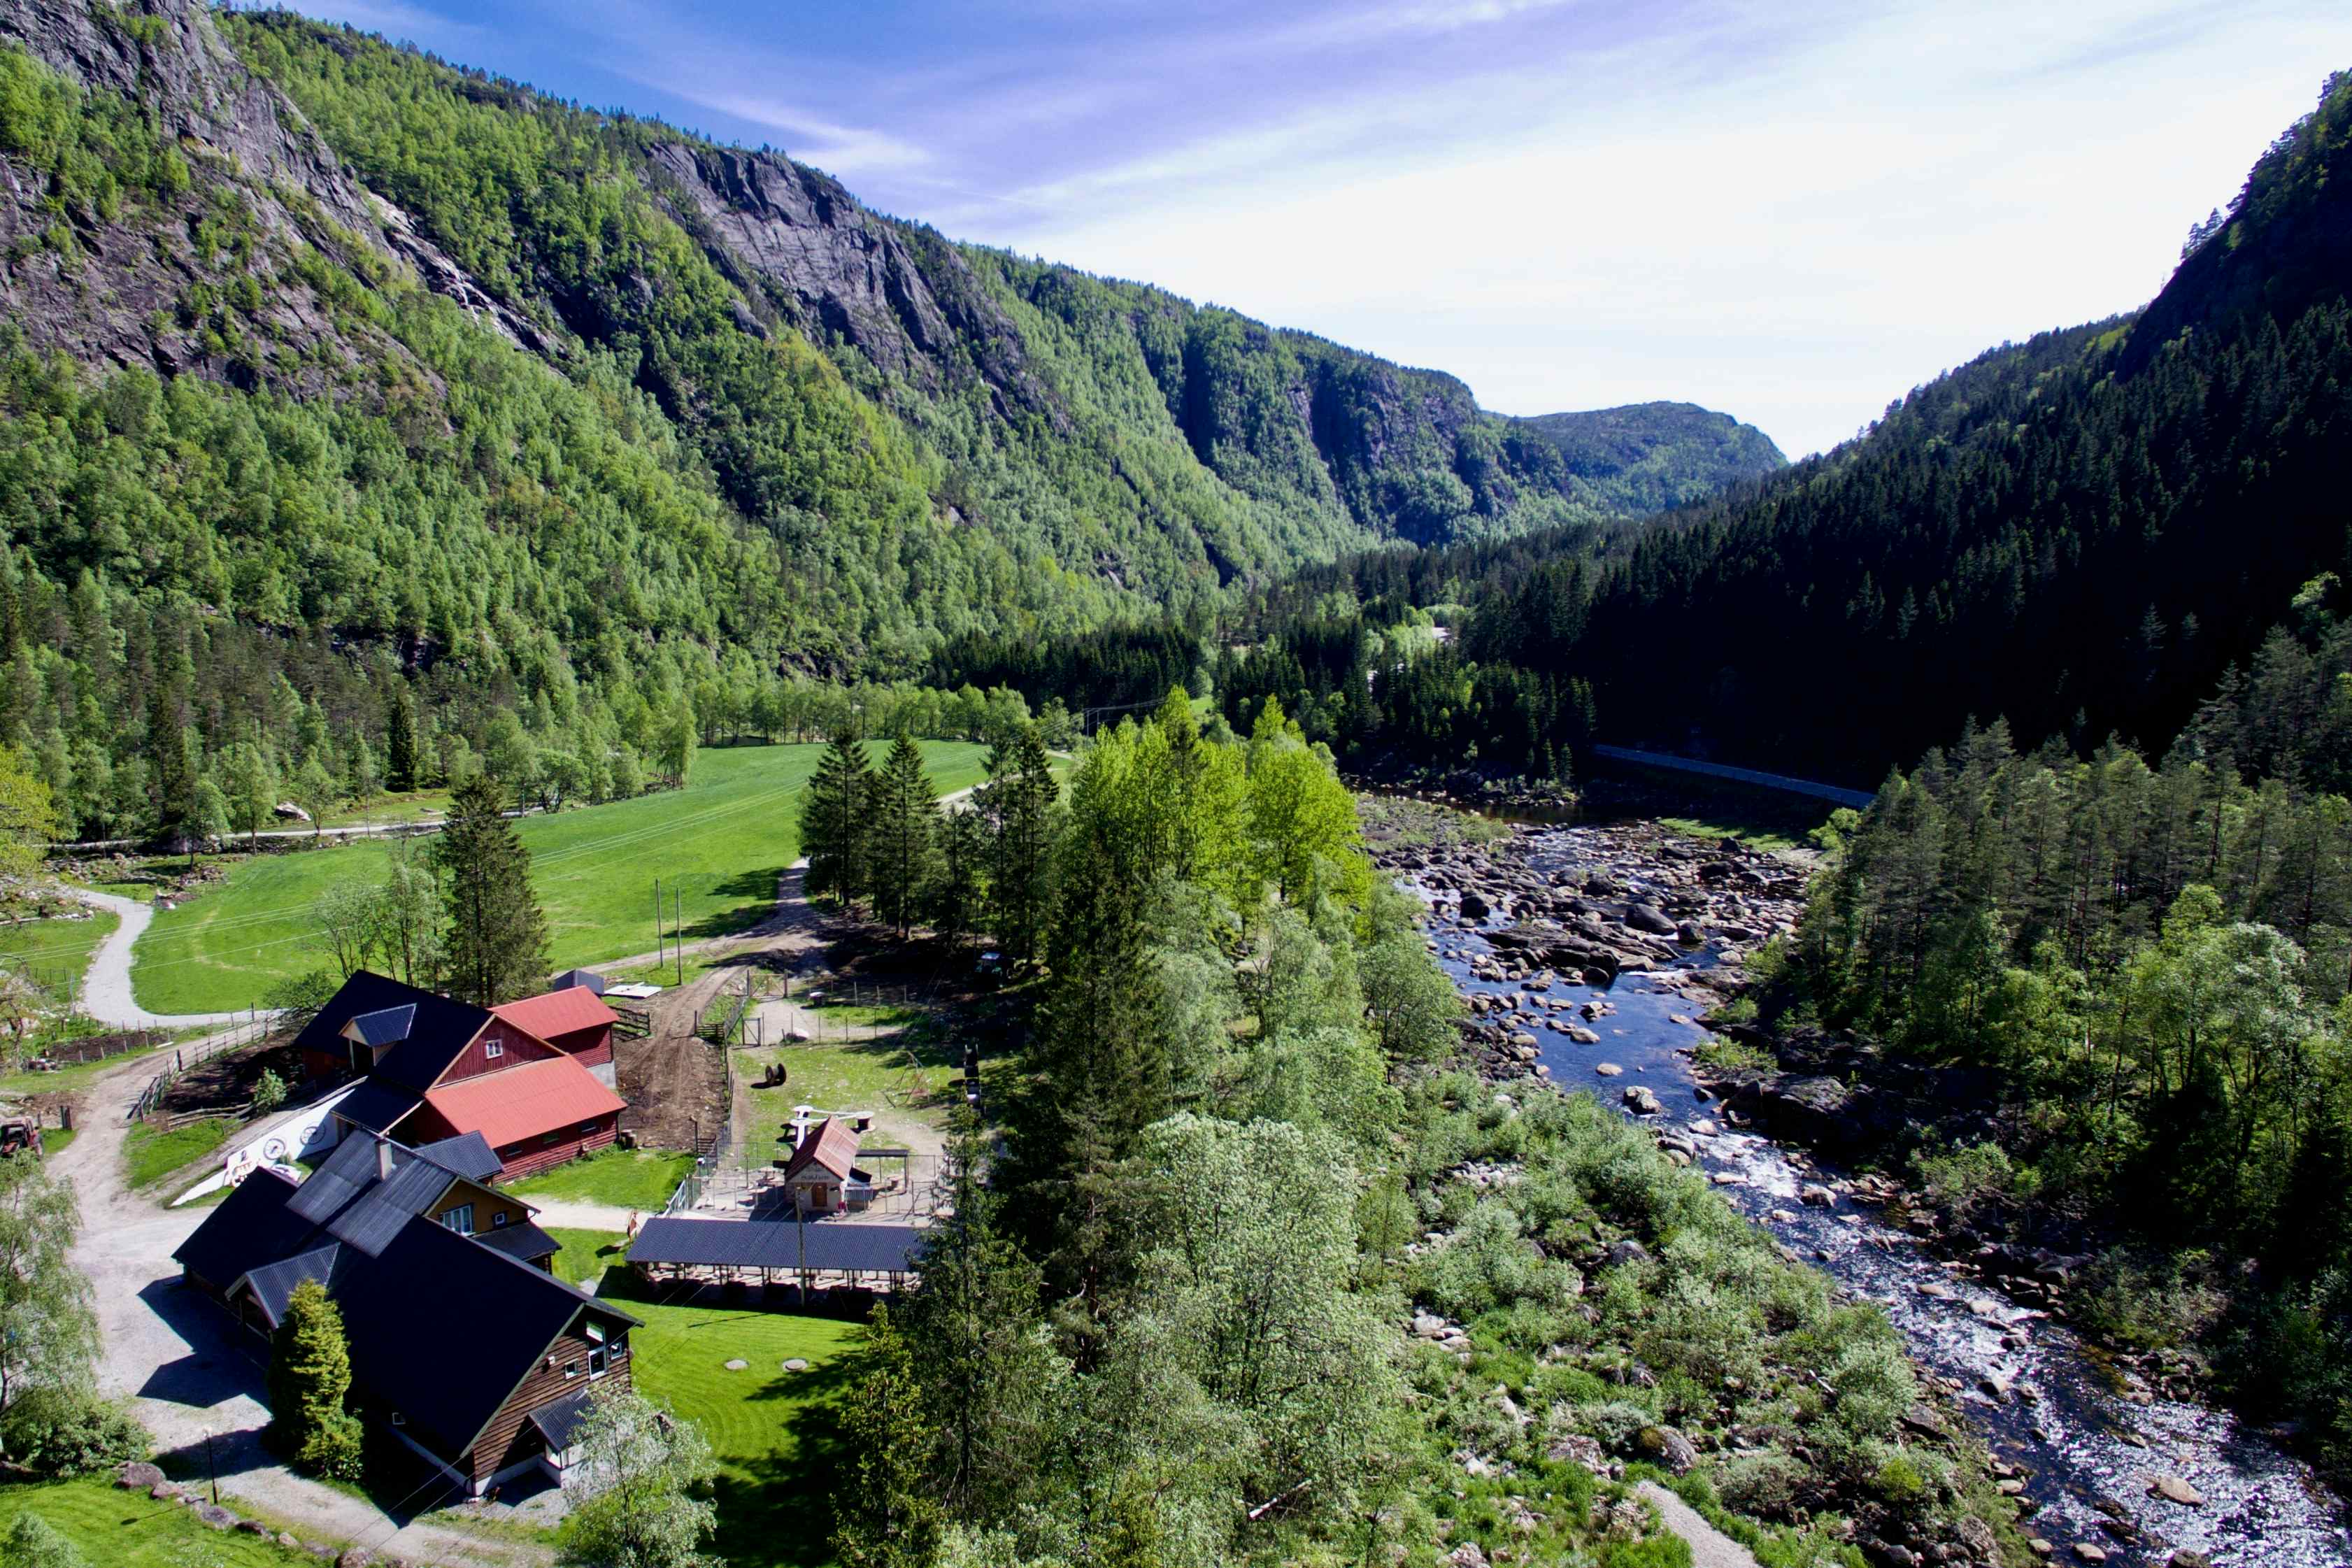 Bird's eye view of campsite at the Sirdal Huskyfarm. Mountains, valley and a river with camping buildings and campsite